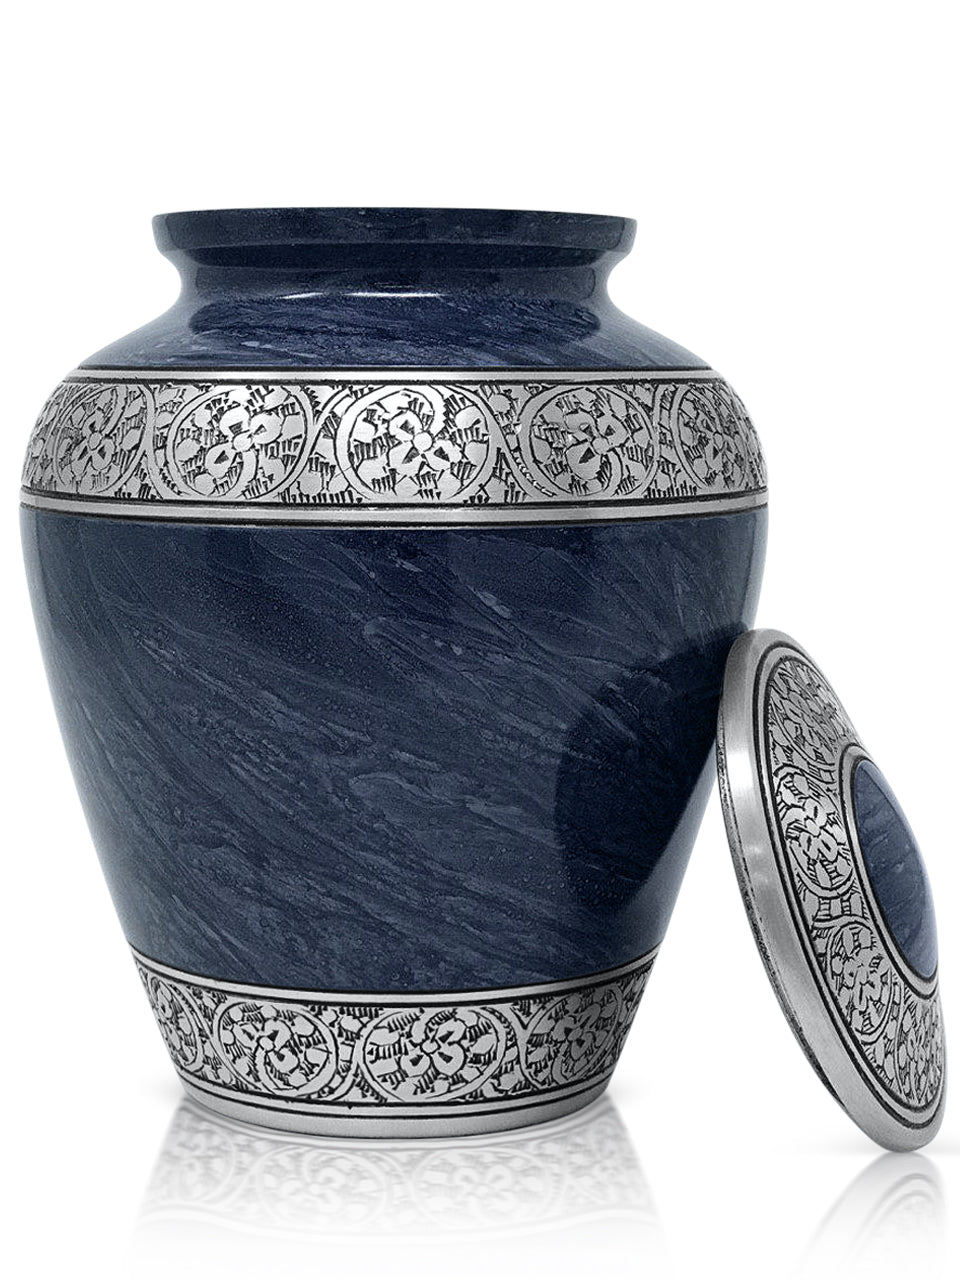 Cremation Urn For Human Ashes Handcrafted Funeral Memorial Urn In Elegant Royal Blue Adult 